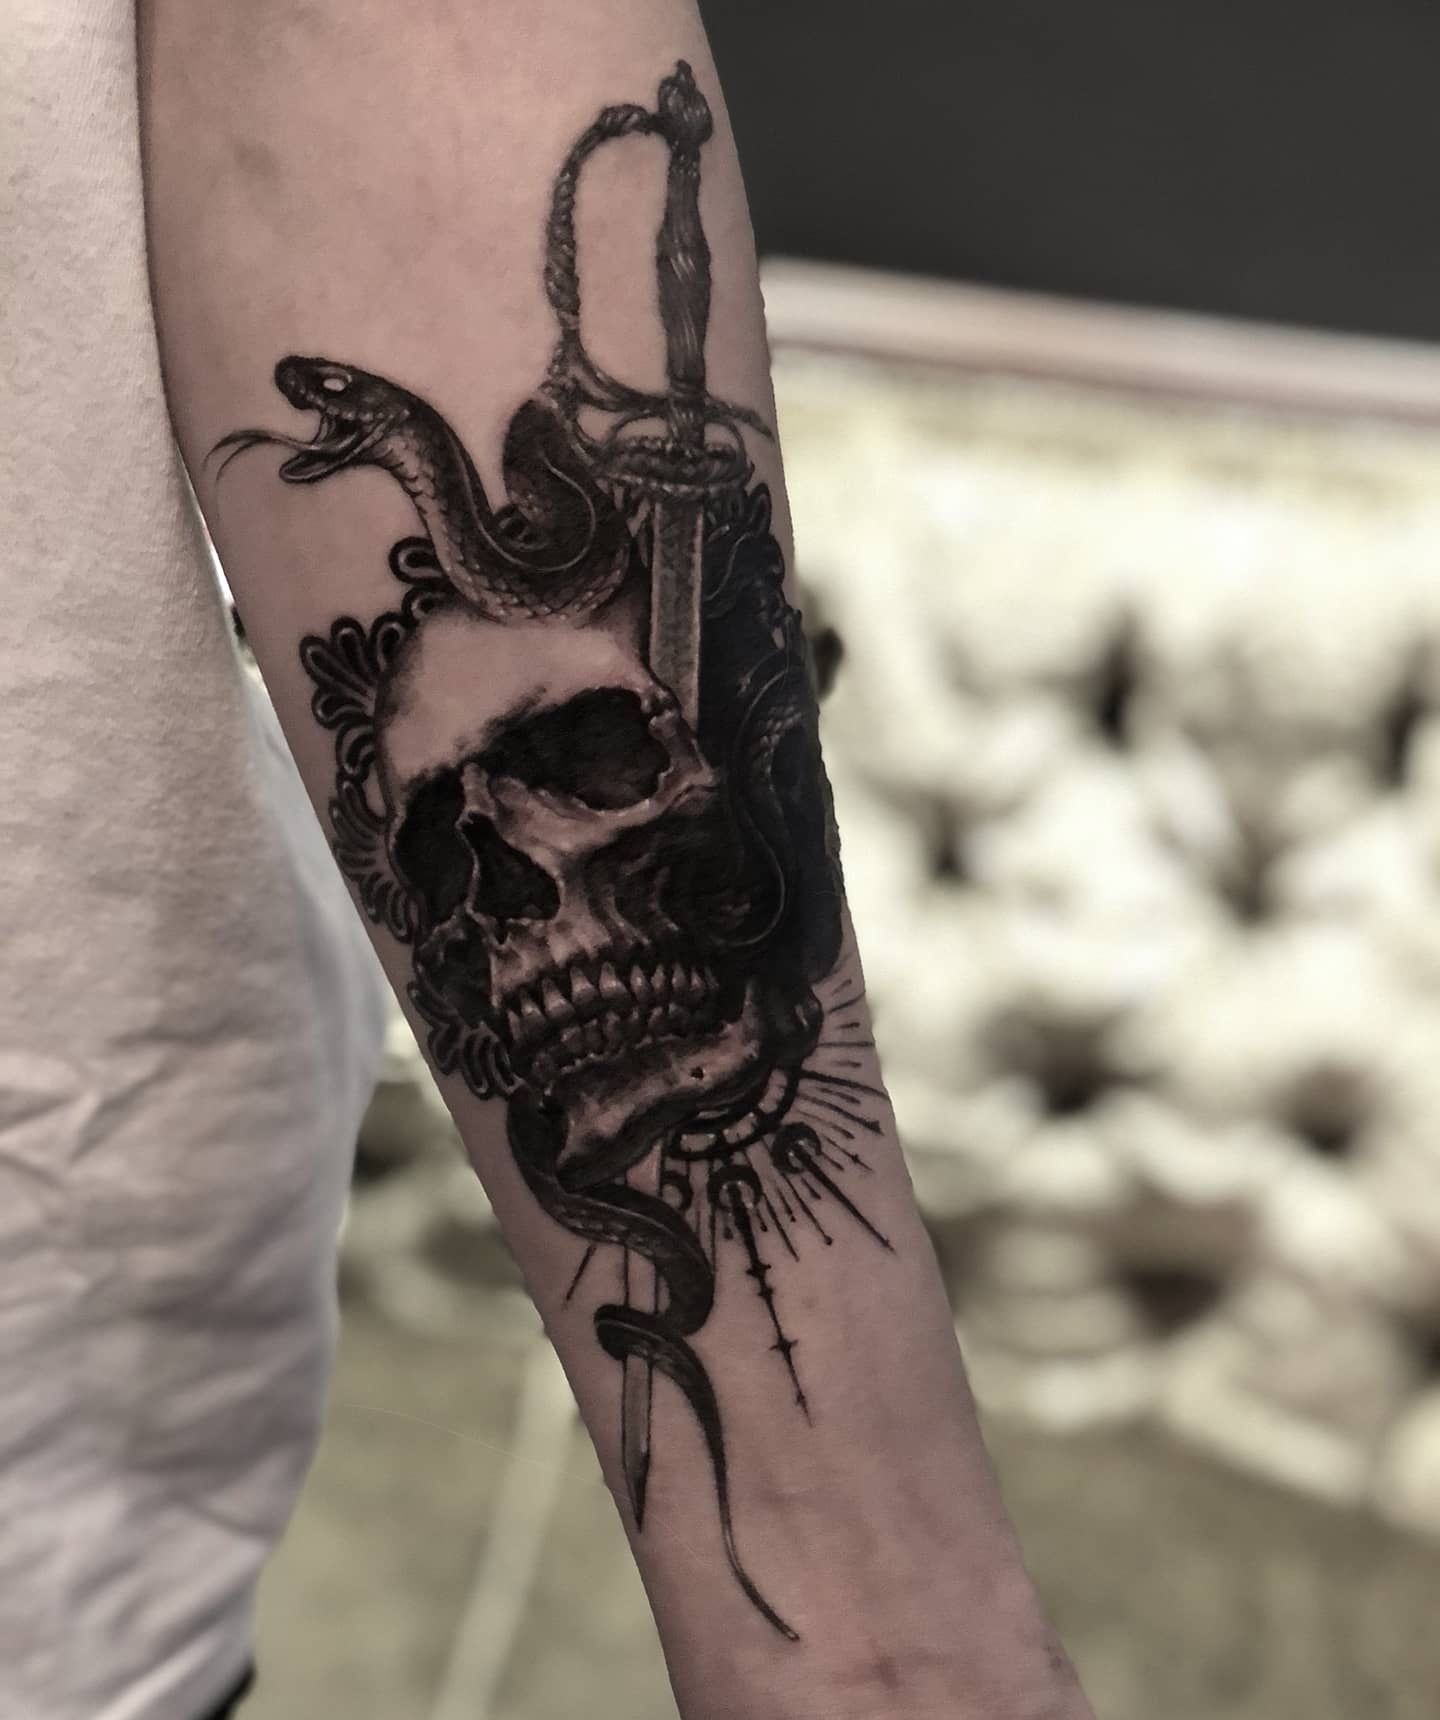 Everything You Need to Know About Getting a Skull and Sword Tattoo  The  Skull  The Skull and Sword